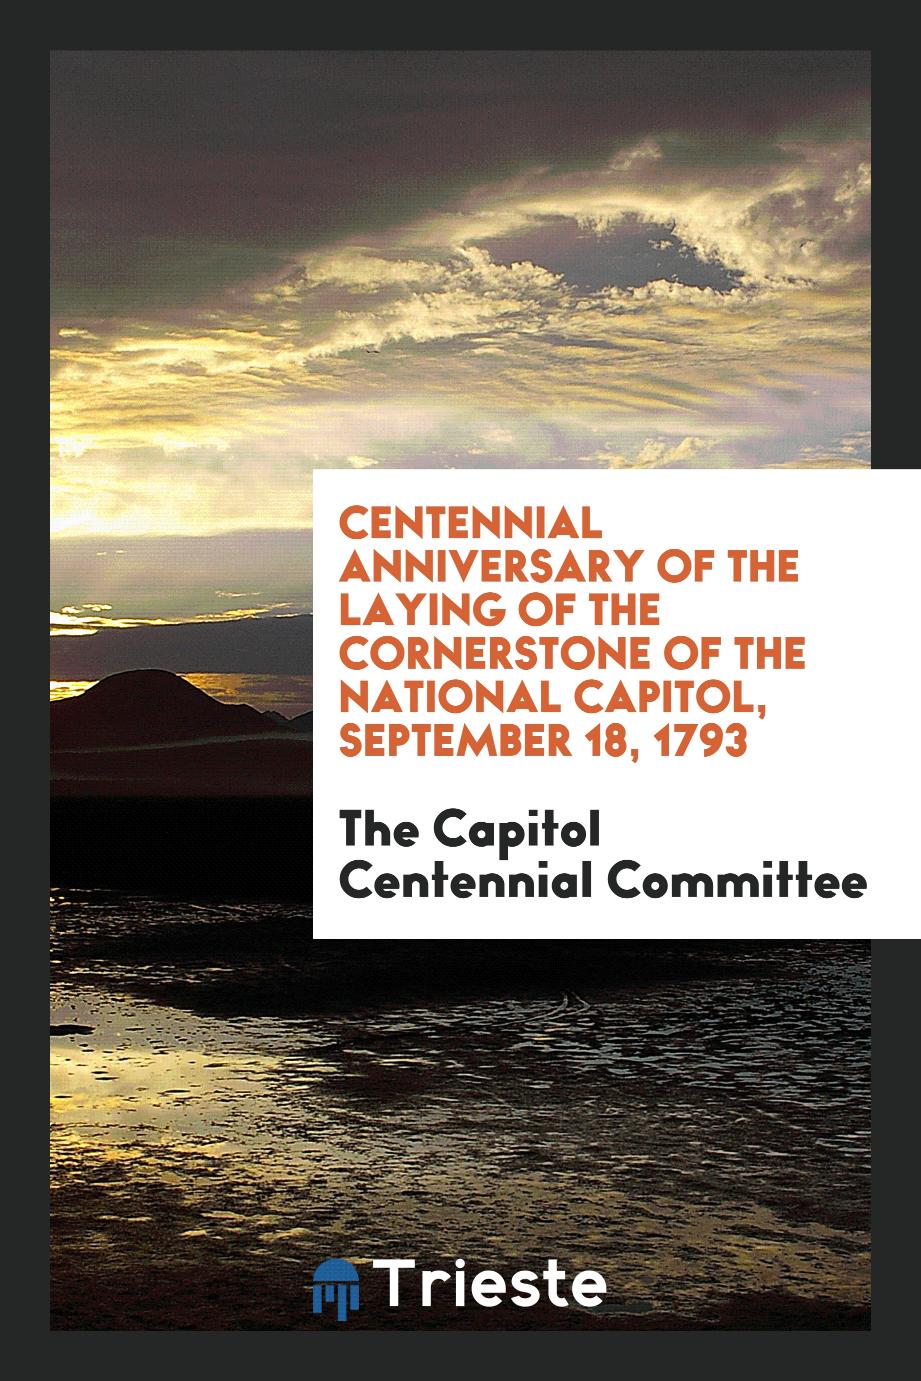 Centennial Anniversary of the Laying of the Cornerstone of the National Capitol, September 18, 1793